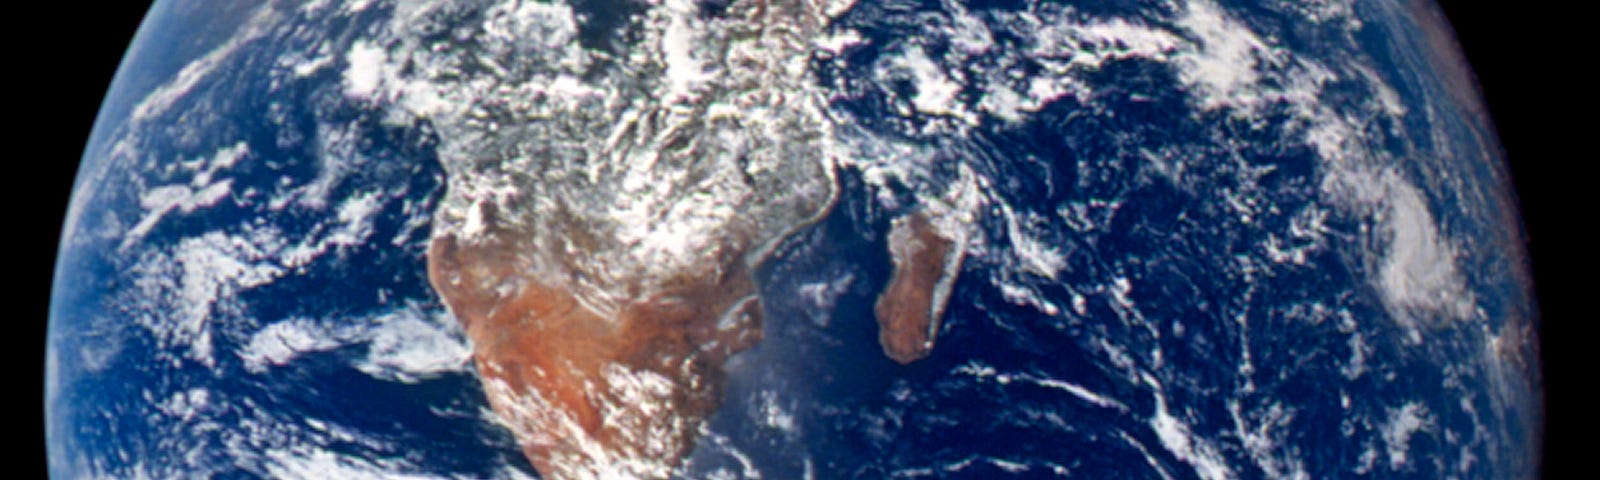 Image of the Earth as seen from space. Photo captured by Apollo 17 astronauts in 1972.